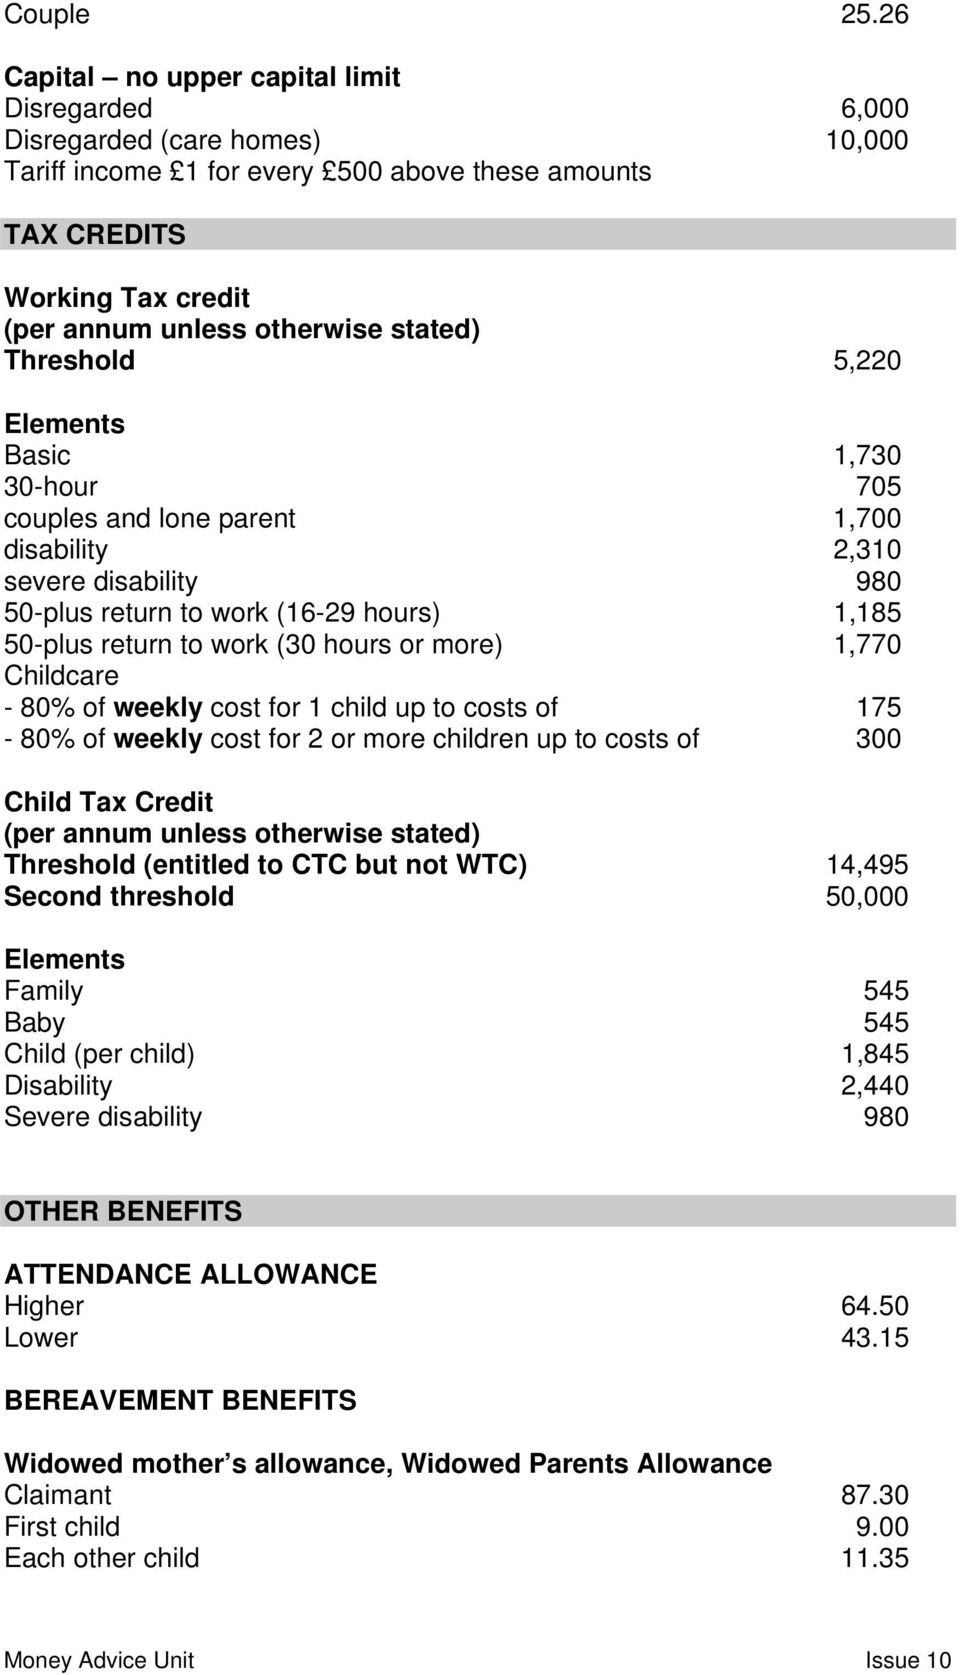 stated) Threshold 5,220 Elements Basic 1,730 30-hour 705 couples and lone parent 1,700 disability 2,310 severe disability 980 50-plus return to work (16-29 hours) 1,185 50-plus return to work (30